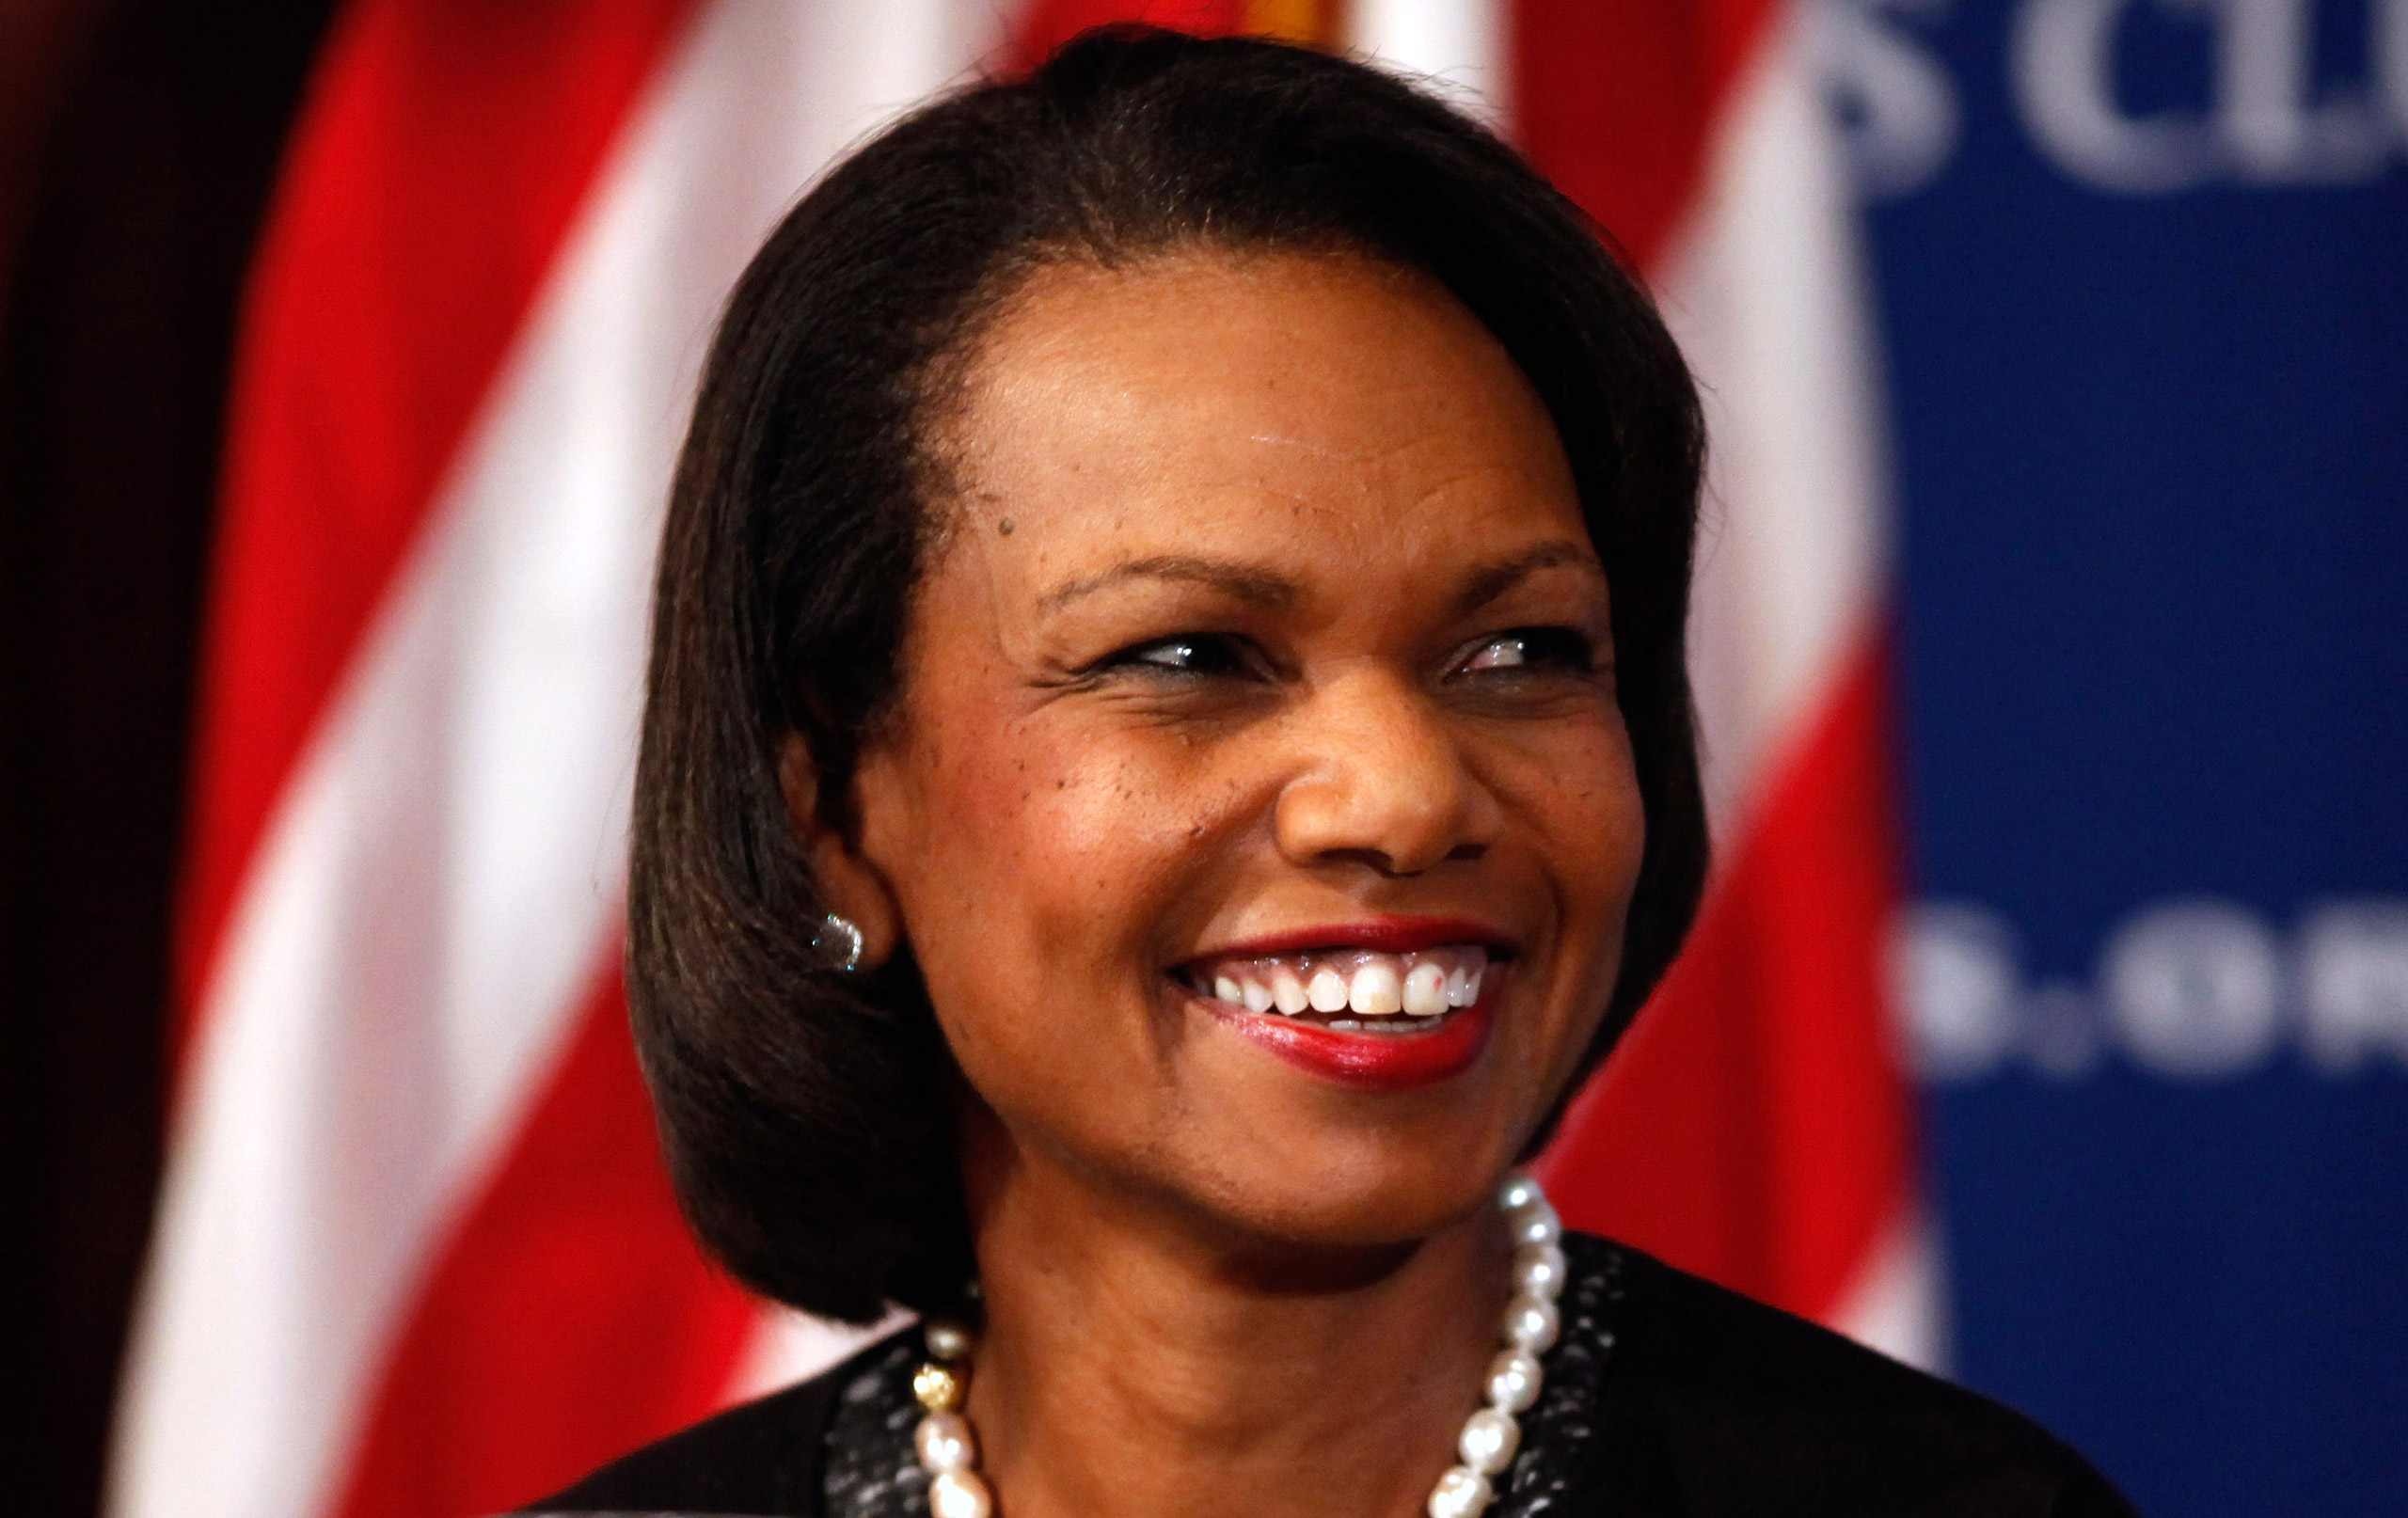 Condoleezza Rice talks about her new book,  Extraordinary, Ordinary People: A Memoir of Family,  during the Newsmakers luncheon at the National Press Club October 15, 2010 in Washington, DC.